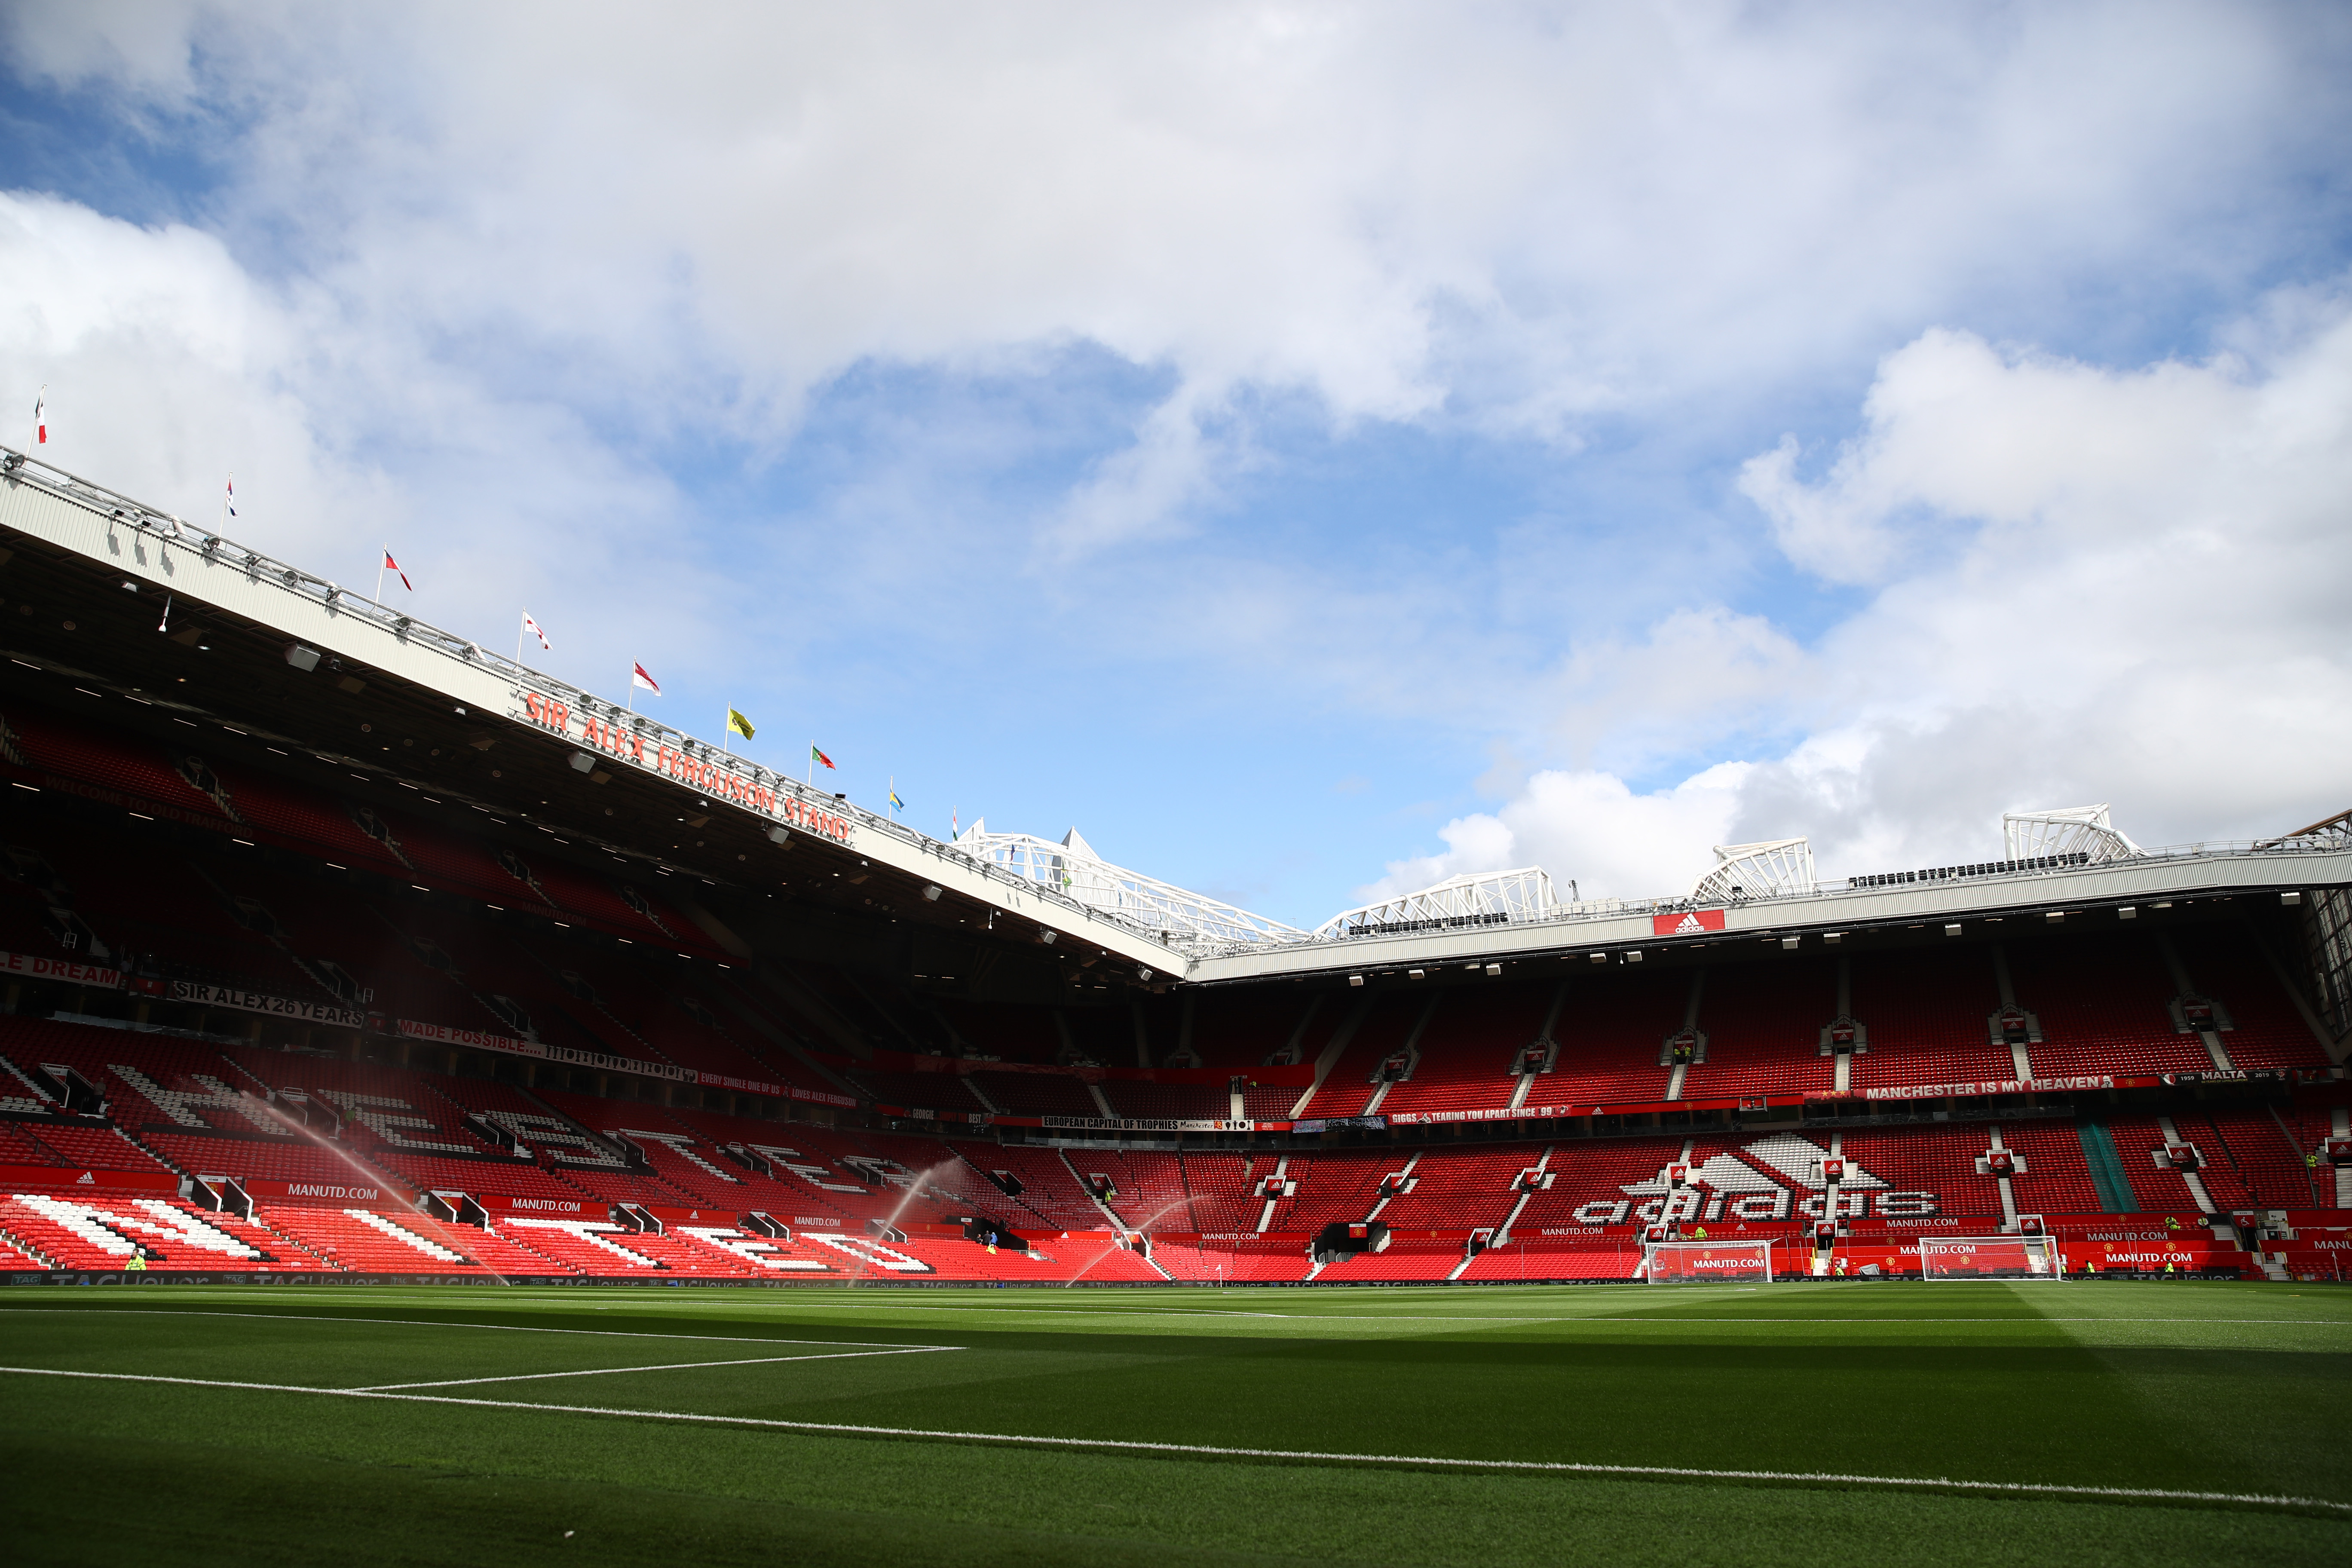 MANCHESTER, ENGLAND - AUGUST 11: General view inside the stadium  prior to the Premier League match between Manchester United and Chelsea FC at Old Trafford on August 11, 2019 in Manchester, United Kingdom. (Photo by Julian Finney/Getty Images)